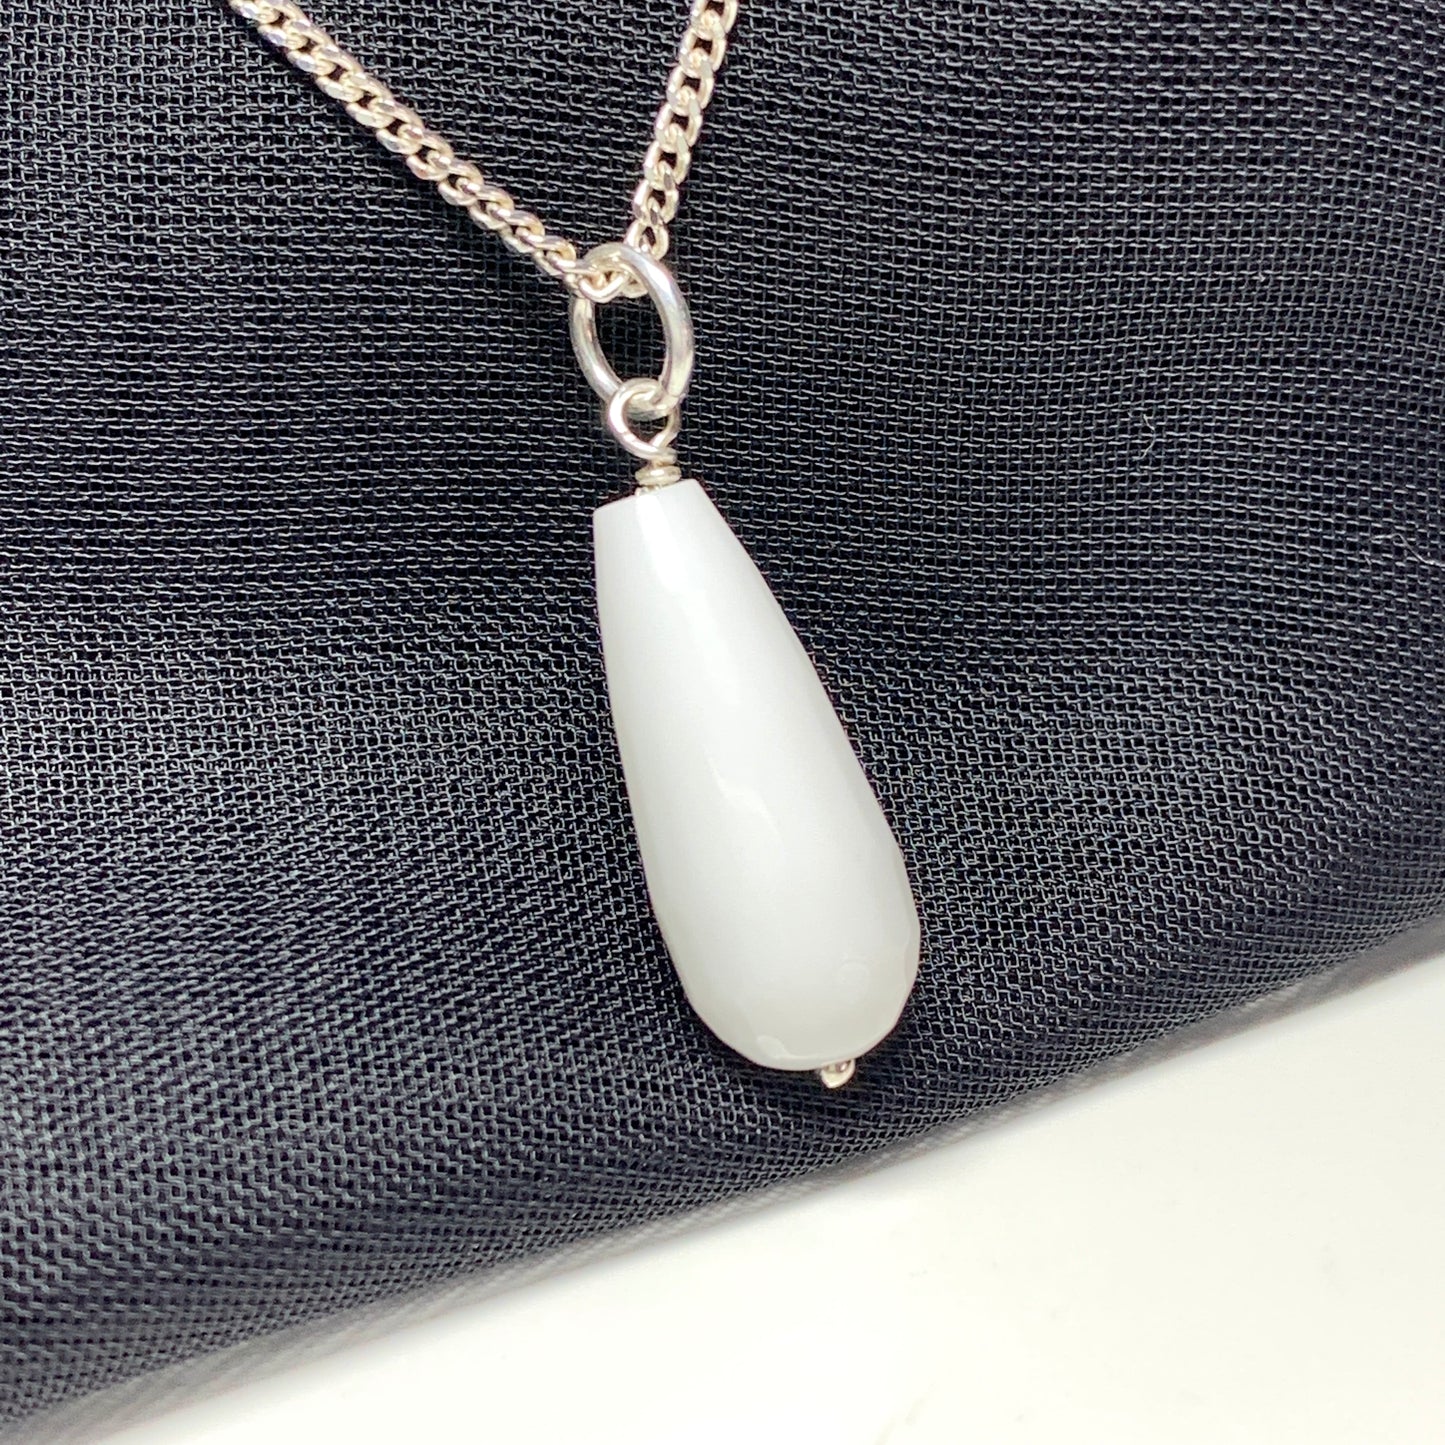 White teardrop shaped agate necklace pendent